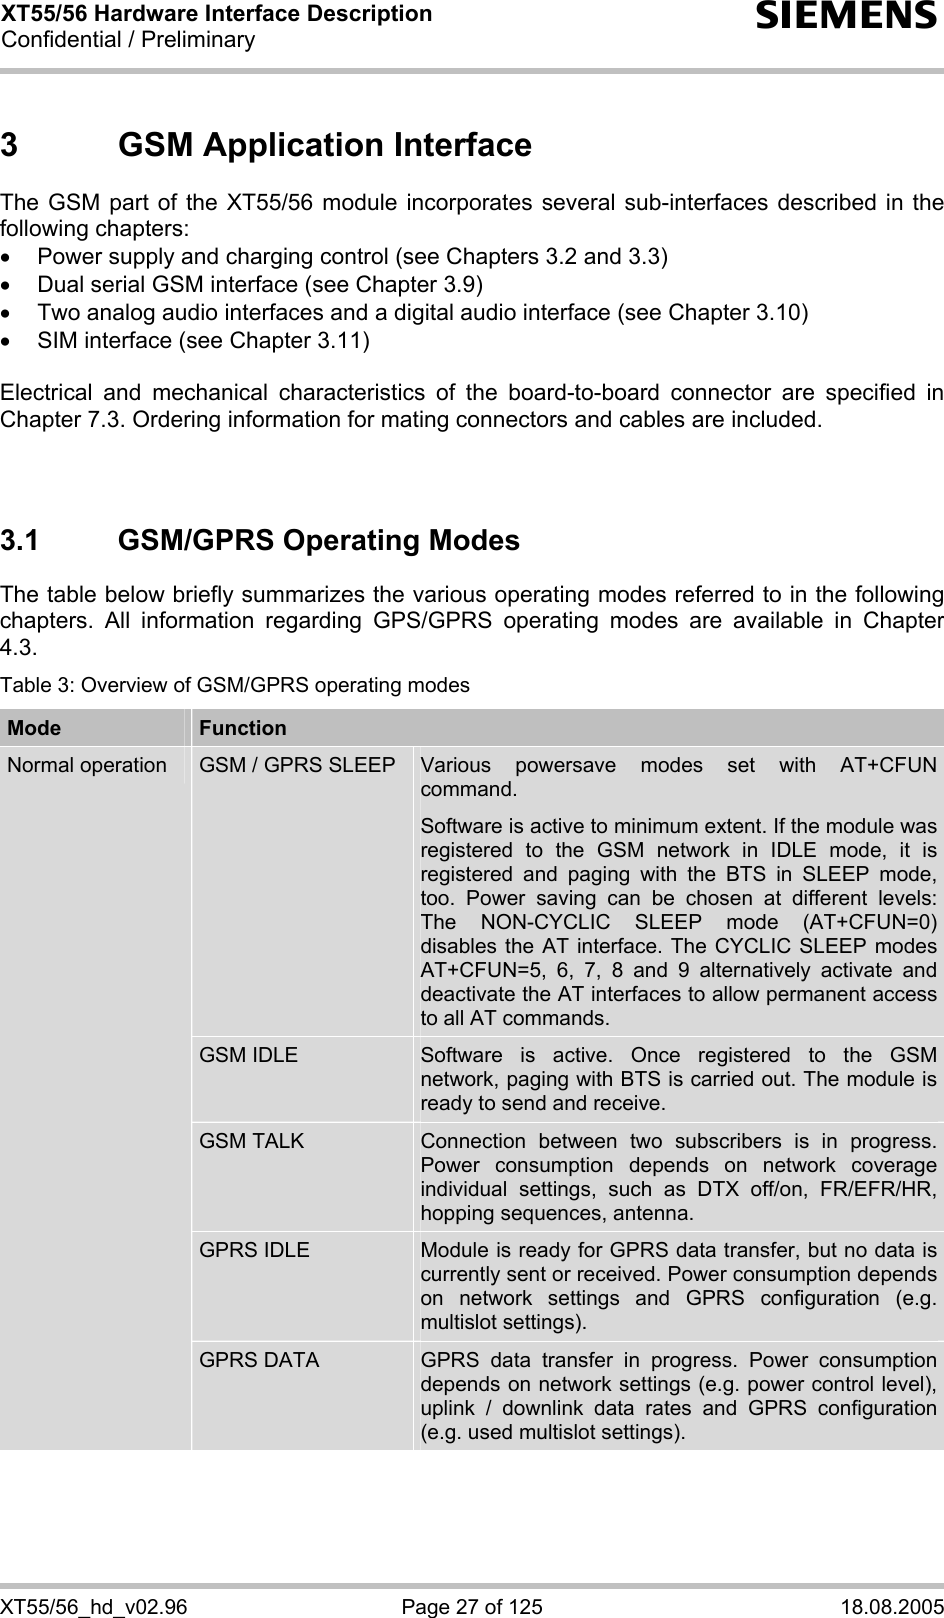 XT55/56 Hardware Interface Description Confidential / Preliminary s XT55/56_hd_v02.96  Page 27 of 125  18.08.2005 3  GSM Application Interface The GSM part of the XT55/56 module incorporates several sub-interfaces described in the following chapters: •  Power supply and charging control (see Chapters 3.2 and 3.3) •  Dual serial GSM interface (see Chapter 3.9) •  Two analog audio interfaces and a digital audio interface (see Chapter 3.10) •  SIM interface (see Chapter 3.11)  Electrical and mechanical characteristics of the board-to-board connector are specified in Chapter 7.3. Ordering information for mating connectors and cables are included.   3.1  GSM/GPRS Operating Modes The table below briefly summarizes the various operating modes referred to in the following chapters. All information regarding GPS/GPRS operating modes are available in Chapter 4.3. Table 3: Overview of GSM/GPRS operating modes Mode  Function GSM / GPRS SLEEP  Various powersave modes set with AT+CFUN command.  Software is active to minimum extent. If the module was registered to the GSM network in IDLE mode, it is registered and paging with the BTS in SLEEP mode, too. Power saving can be chosen at different levels: The NON-CYCLIC SLEEP mode (AT+CFUN=0) disables the AT interface. The CYCLIC SLEEP modes AT+CFUN=5, 6, 7, 8 and 9 alternatively activate and deactivate the AT interfaces to allow permanent access to all AT commands. GSM IDLE  Software is active. Once registered to the GSM network, paging with BTS is carried out. The module is ready to send and receive. GSM TALK  Connection between two subscribers is in progress. Power consumption depends on network coverage individual settings, such as DTX off/on, FR/EFR/HR, hopping sequences, antenna. GPRS IDLE  Module is ready for GPRS data transfer, but no data is currently sent or received. Power consumption depends on network settings and GPRS configuration (e.g. multislot settings). Normal operation GPRS DATA  GPRS data transfer in progress. Power consumption depends on network settings (e.g. power control level), uplink / downlink data rates and GPRS configuration (e.g. used multislot settings). 